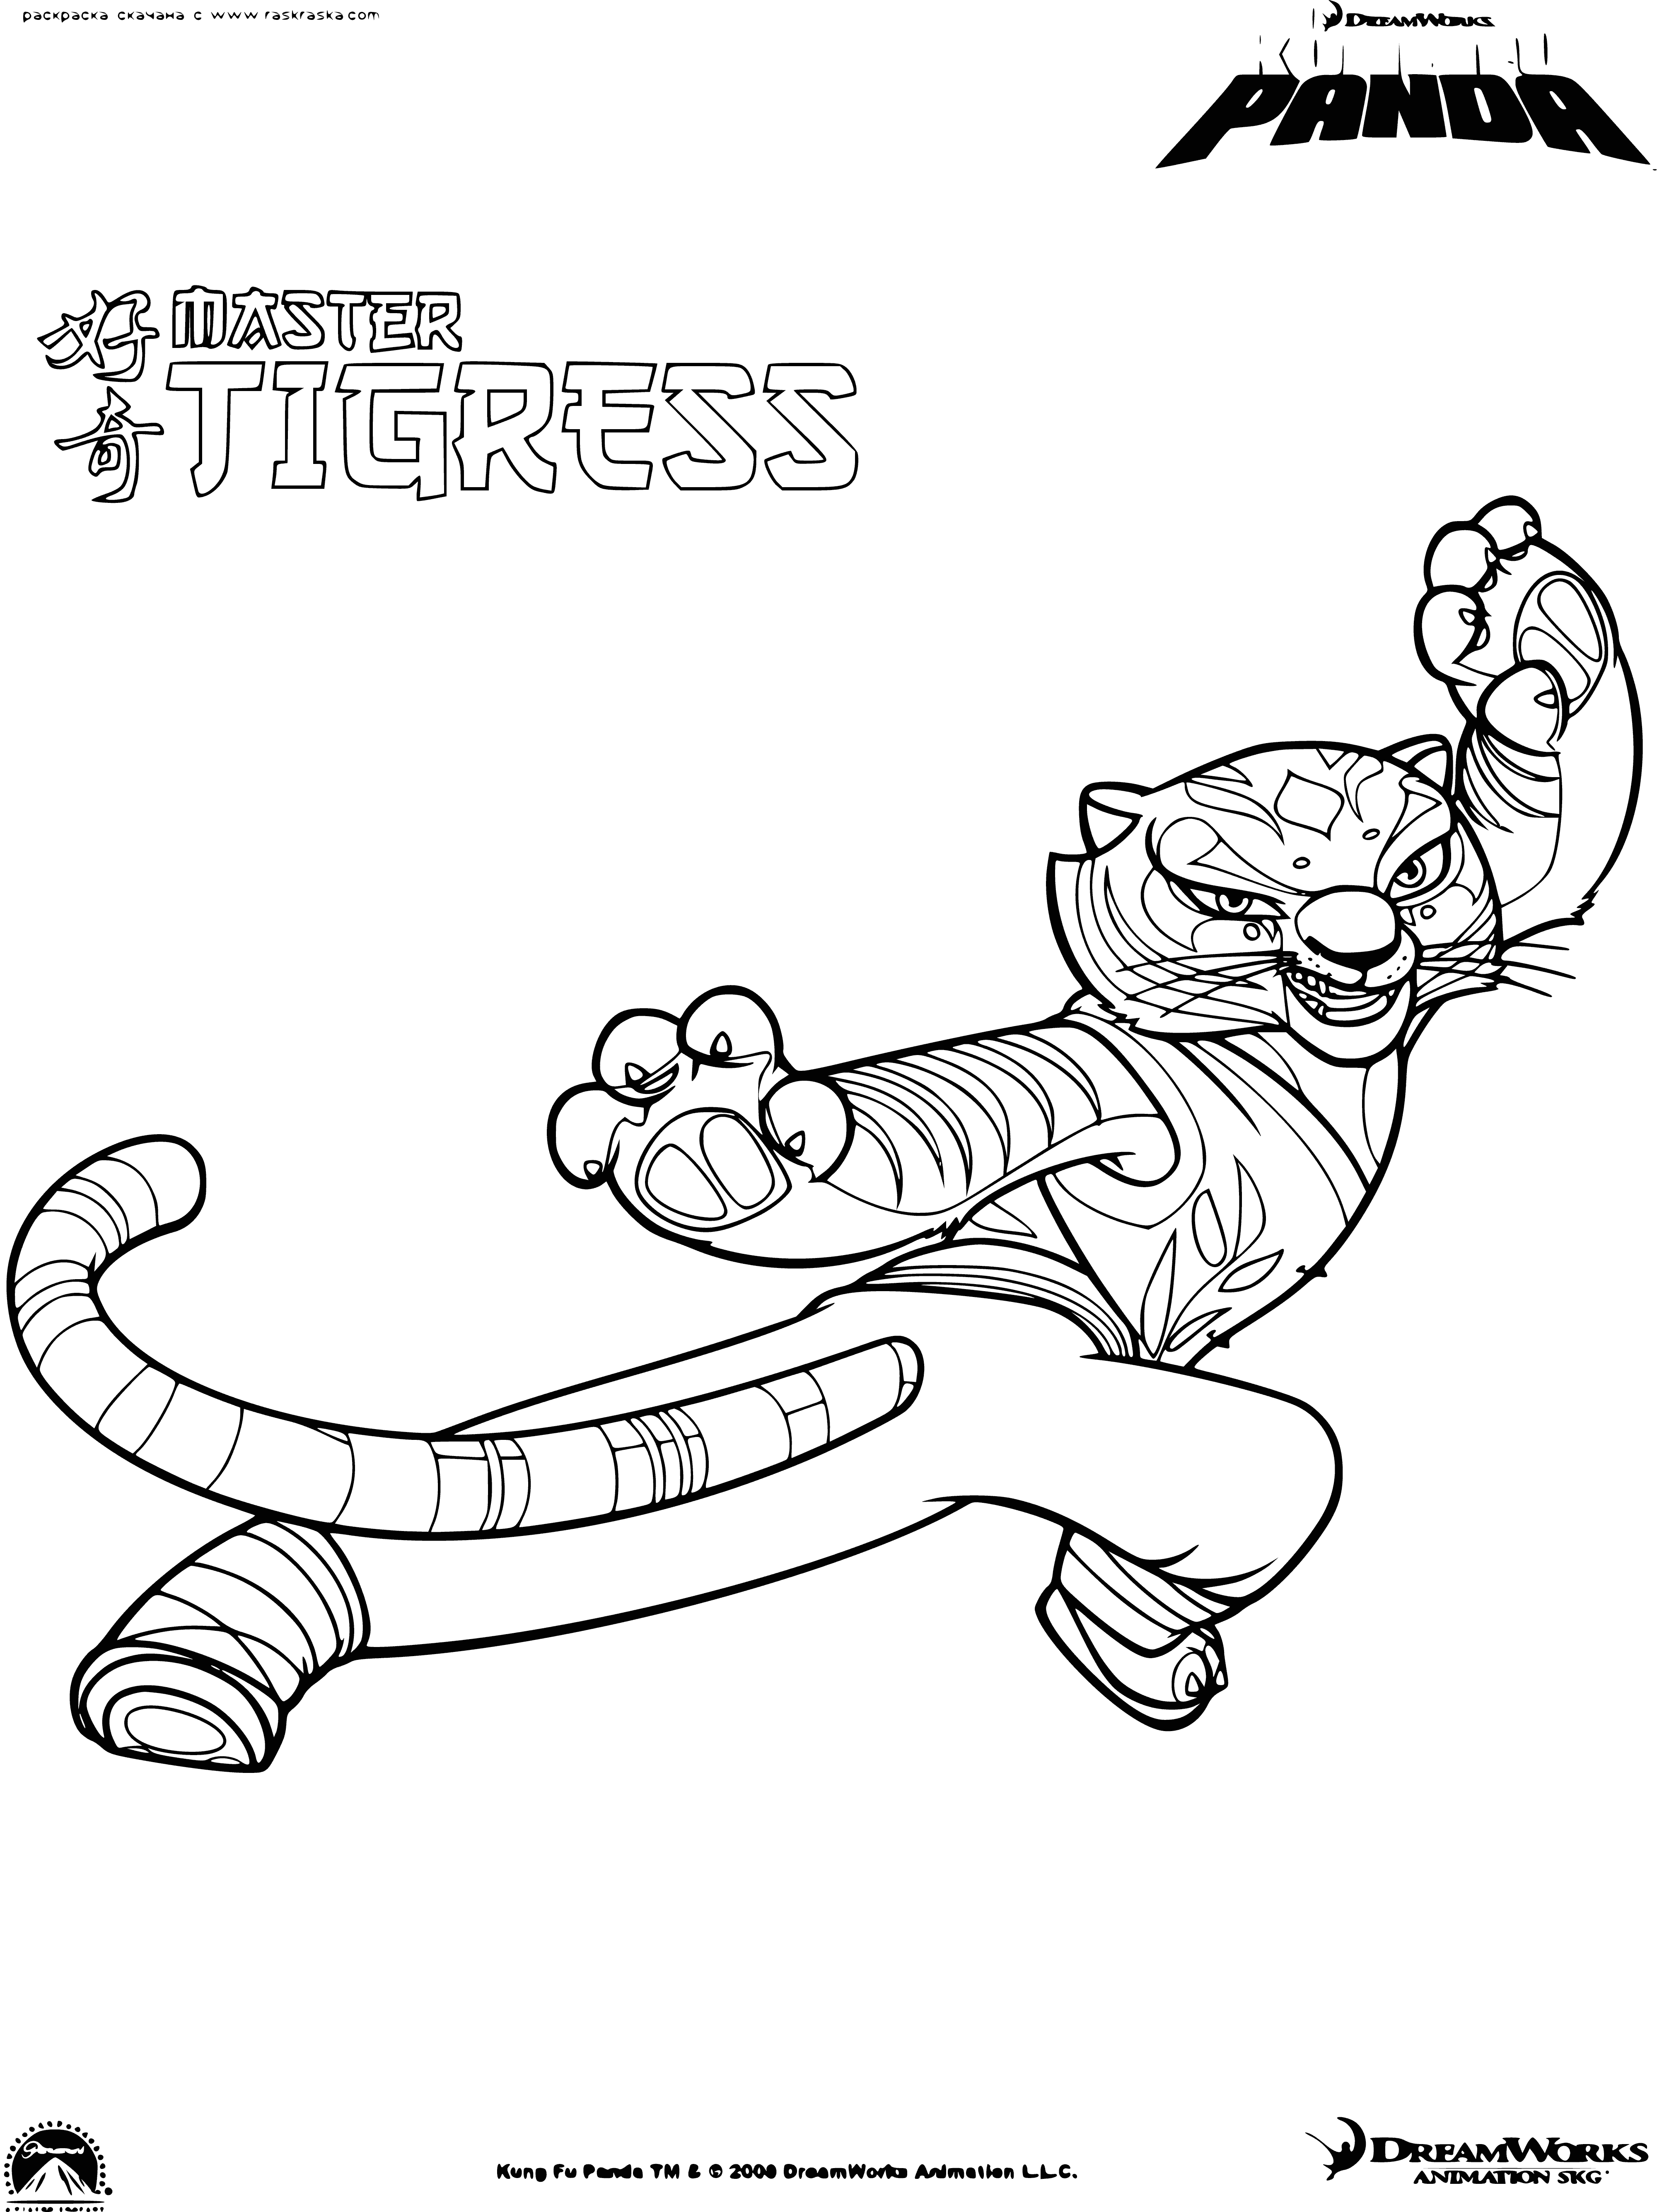 coloring page: Tigress is a fierce, wise & compassionate martial arts master & teacher in the Kung Fu Panda franchise. She is fiercely loyal & dedicated to protecting her friends. #KungFuPanda